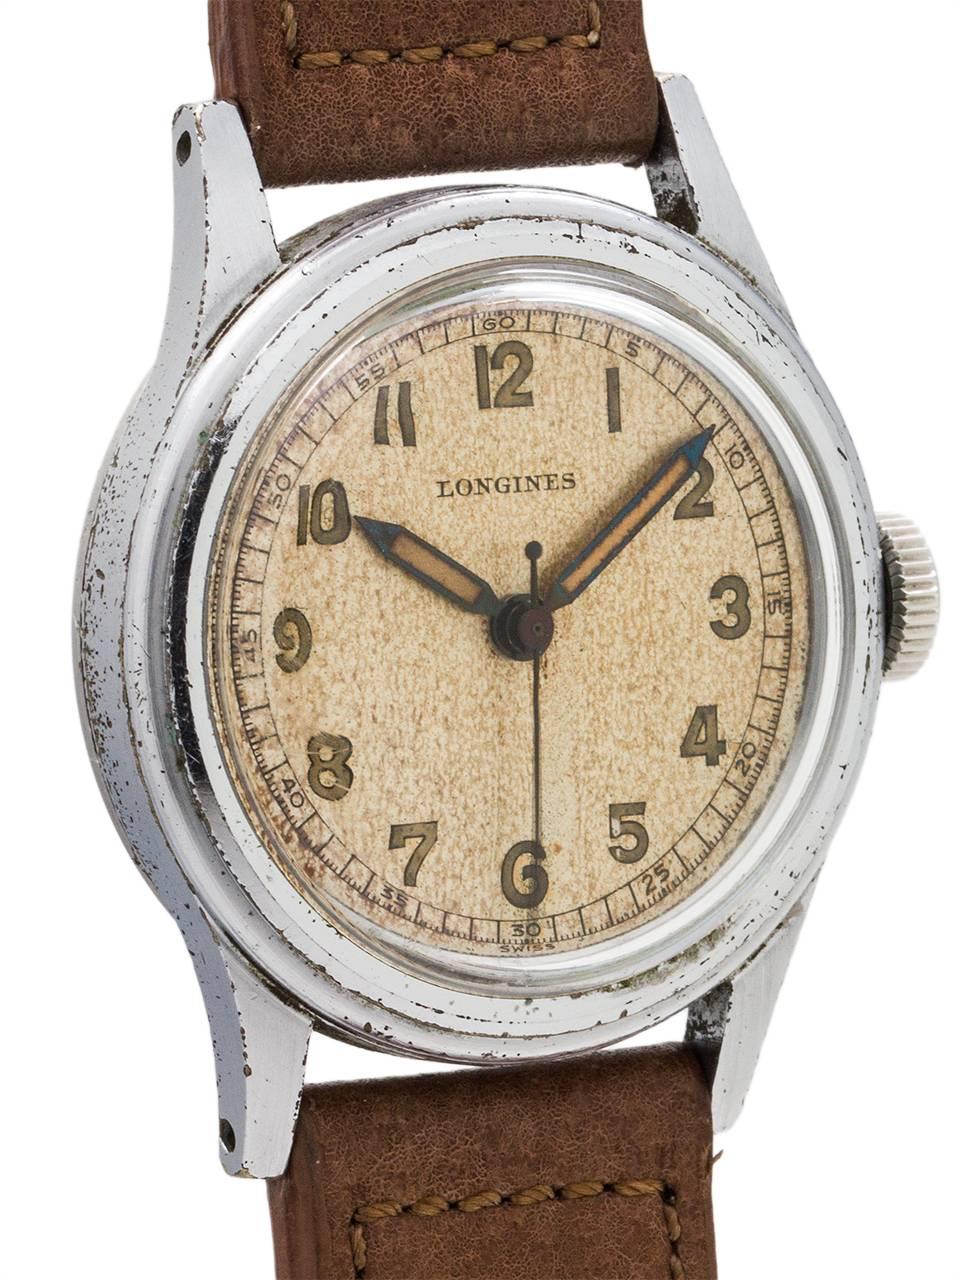 
Vintage Longines stainless steel back, chromium plated top manual wind dress model circa 1940’s. Featuring 33 X 41mm diameter case, which is in remarkable original condition, with screw down caseback, heavy, down turned lugs, and very nicely